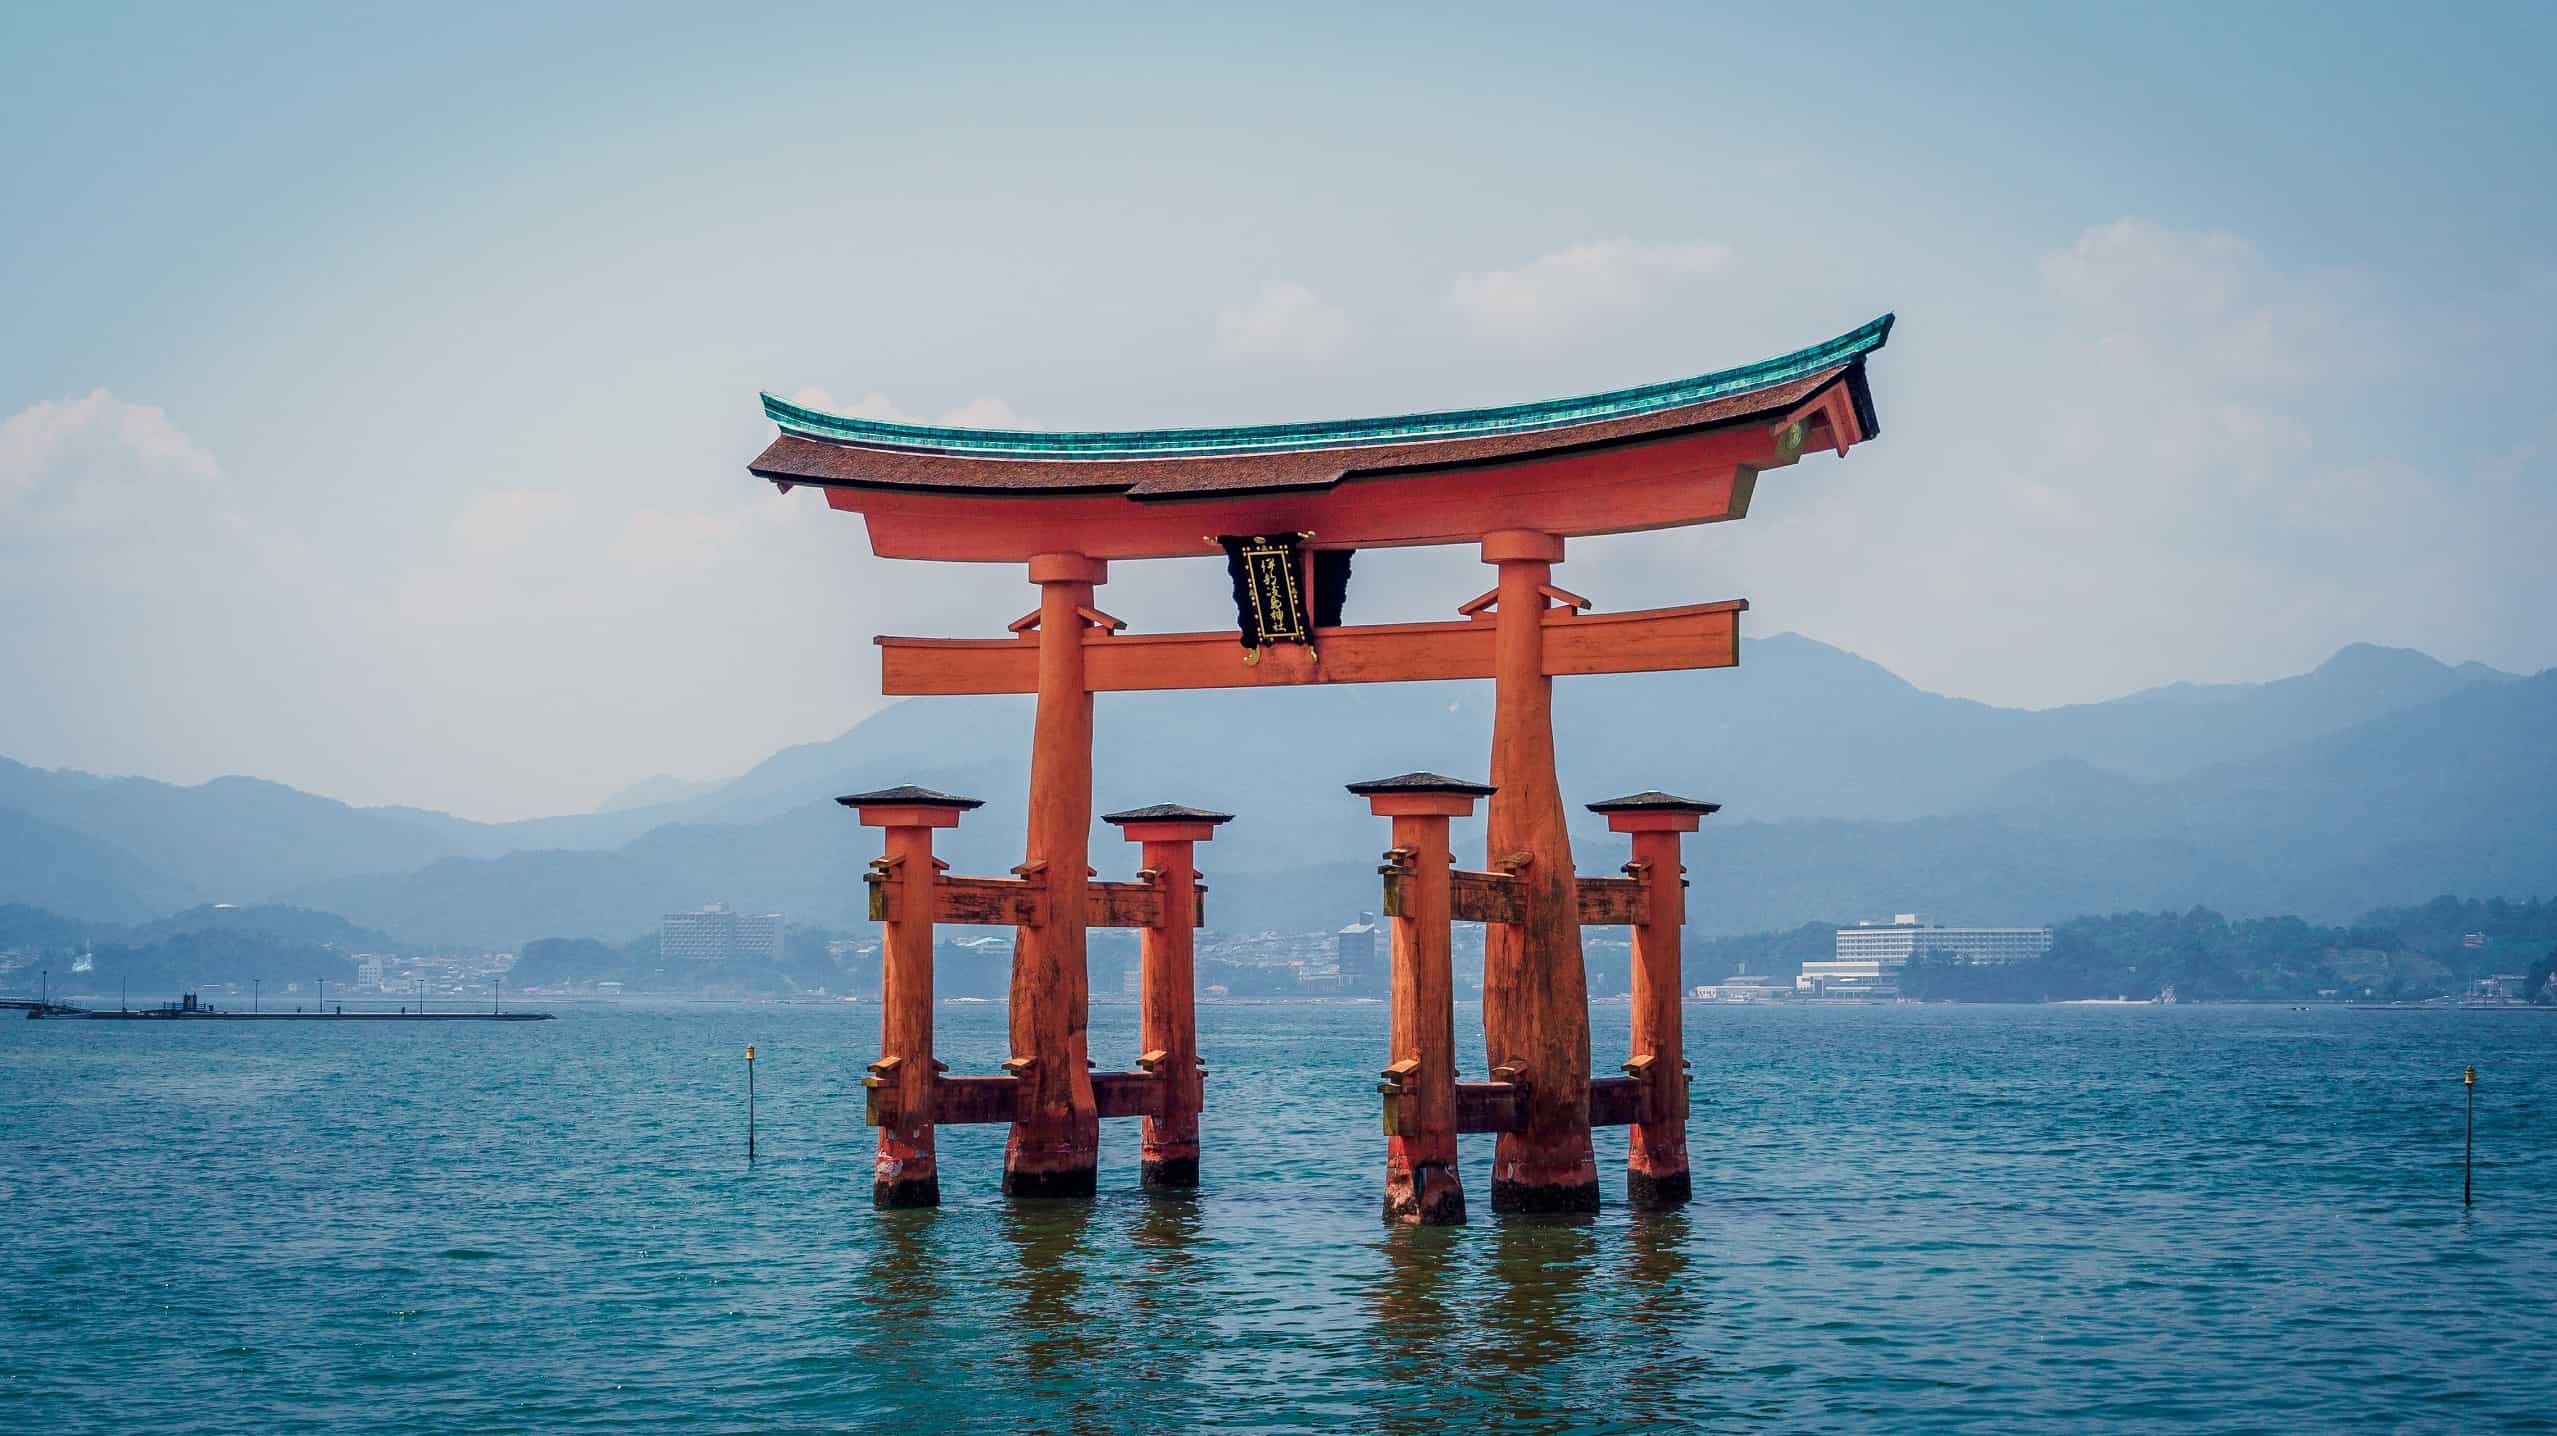 Which place in Japan would you recommend for your foreign friends to visit?